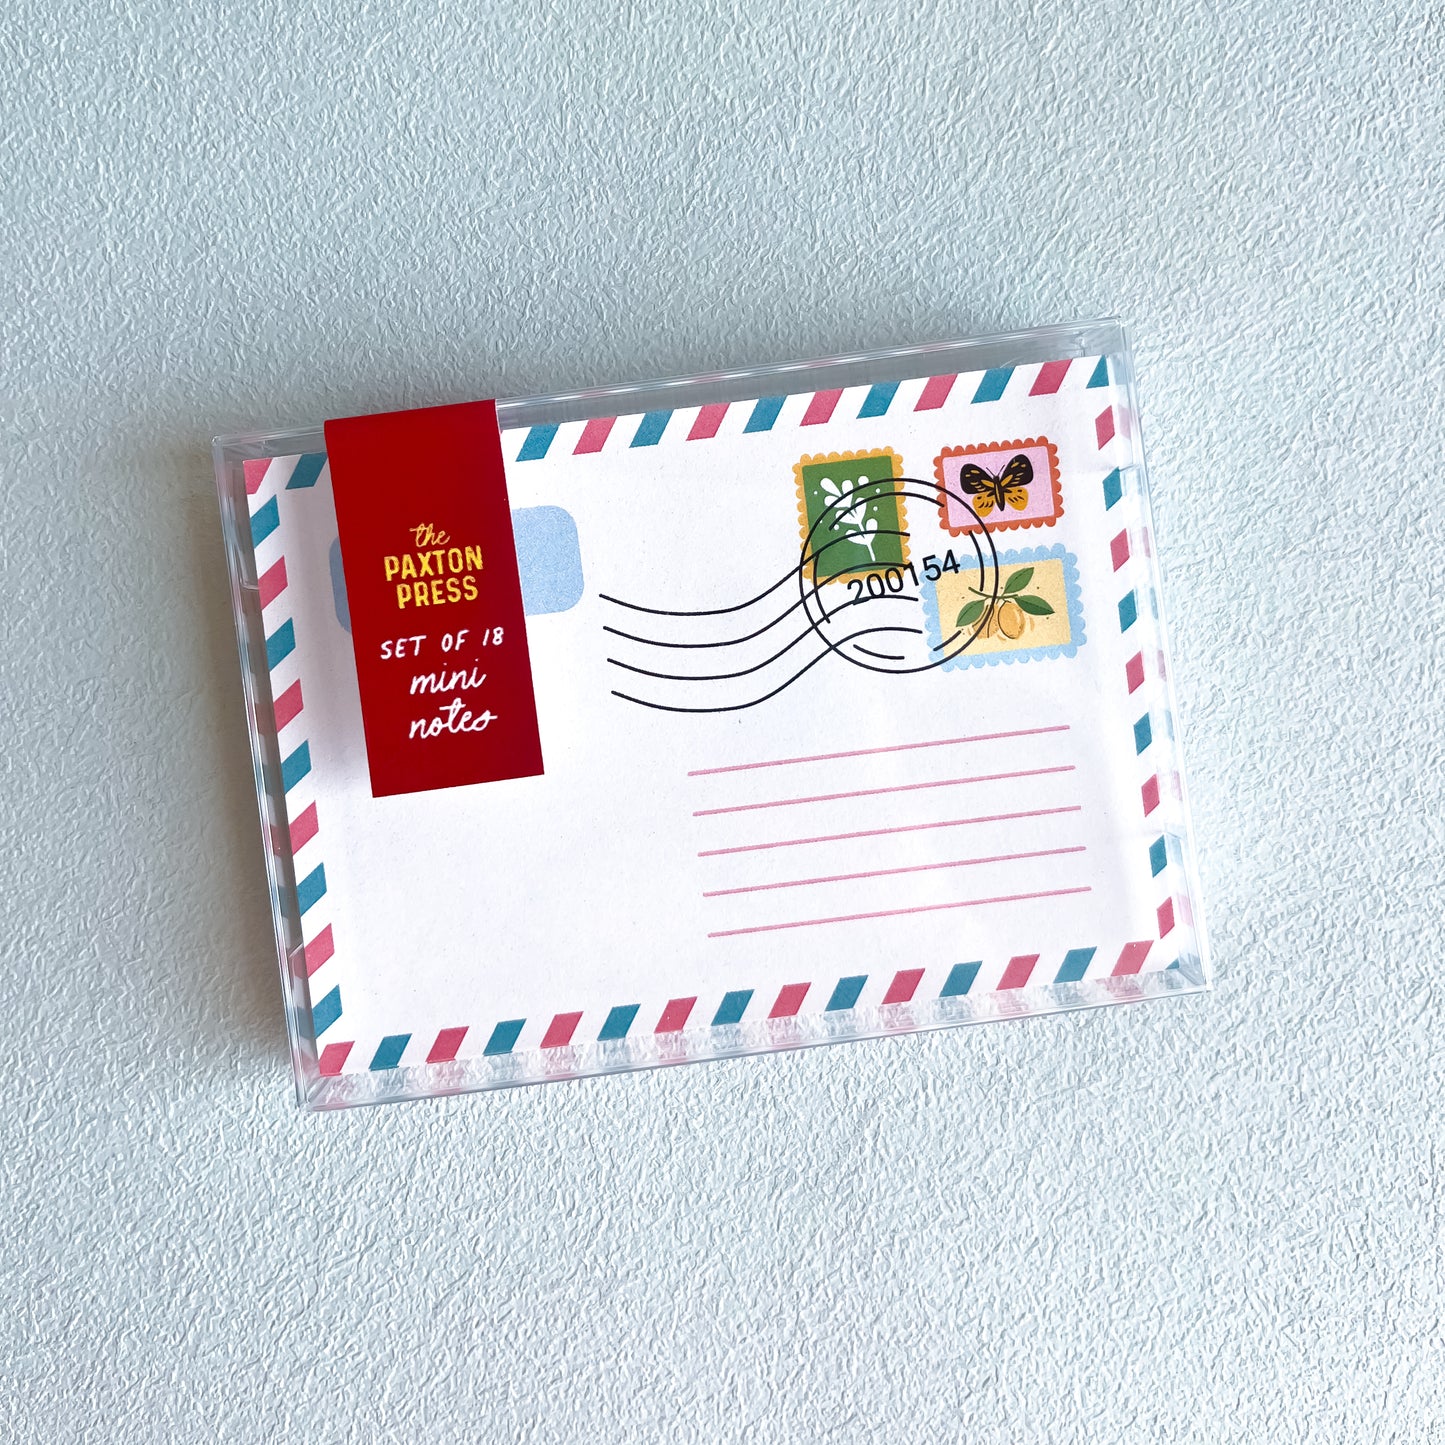 Mini Mail - Post Cards